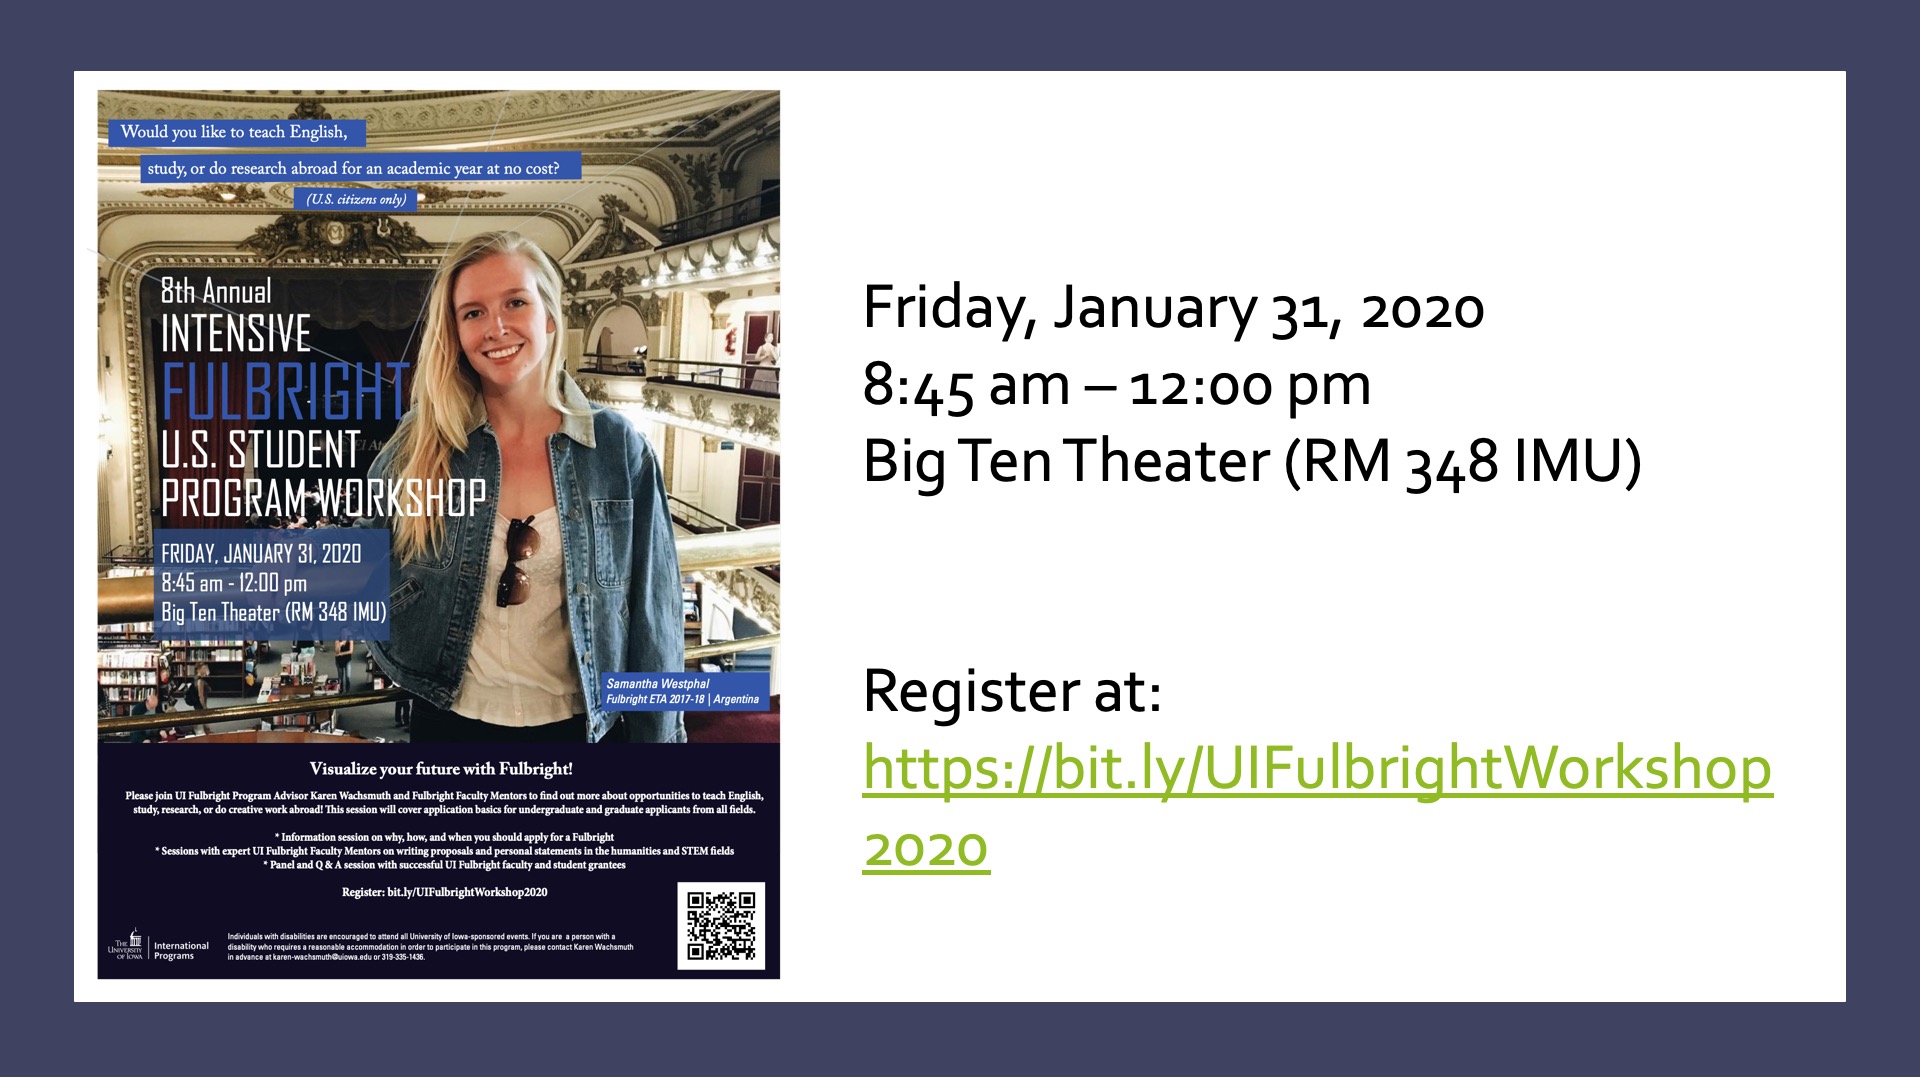 Fulbright workshop friday January 31 2020 8:45 am - 12:00 pm Big Ten Theater (Rm 348 IMU) register at: http://bit.ly/UIFulbrightWorkshop2020